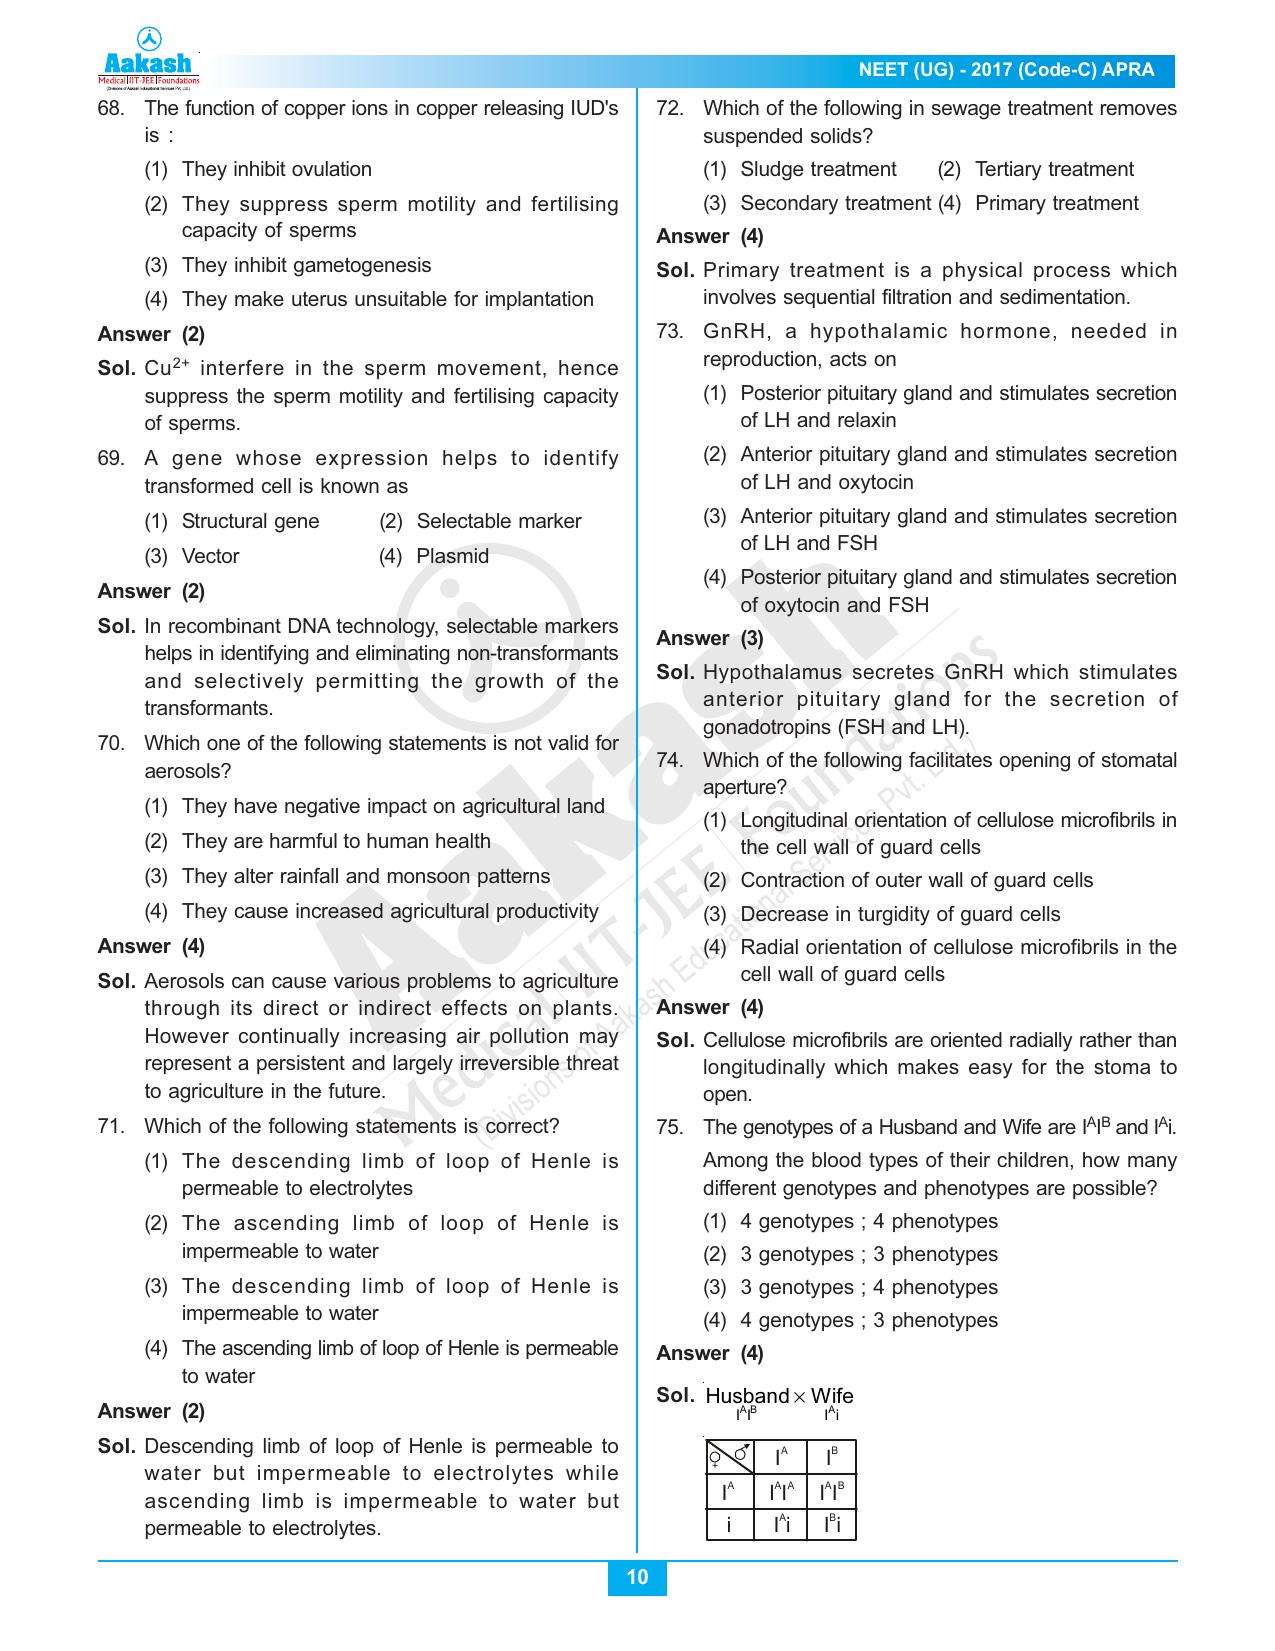  NEET Code C 2017 Answer & Solutions - Page 10